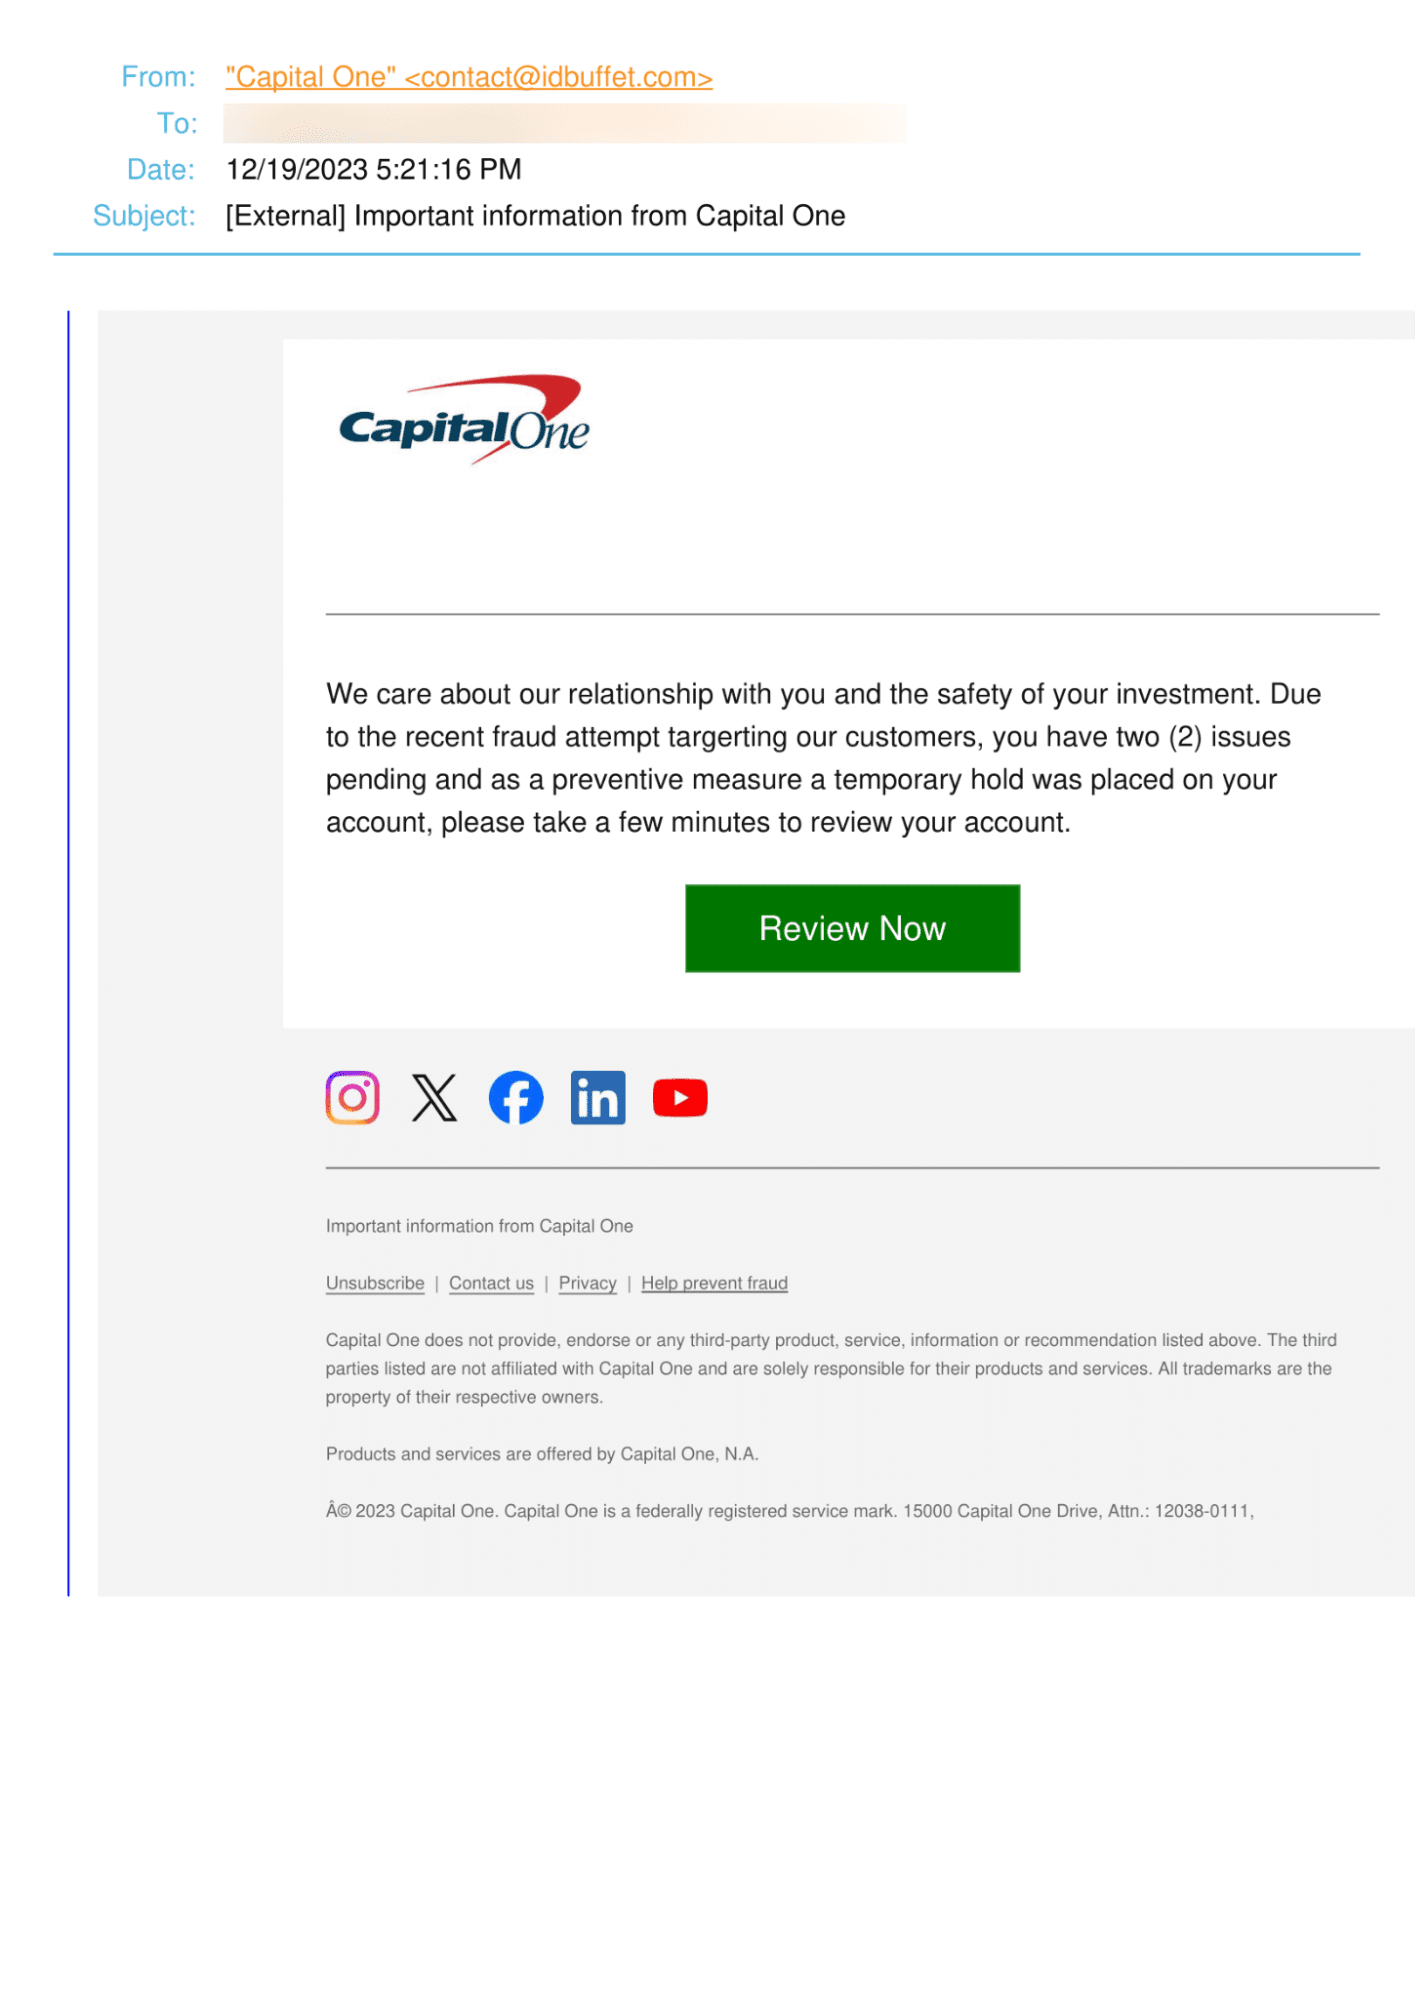 AL Capital One Impersonator Email